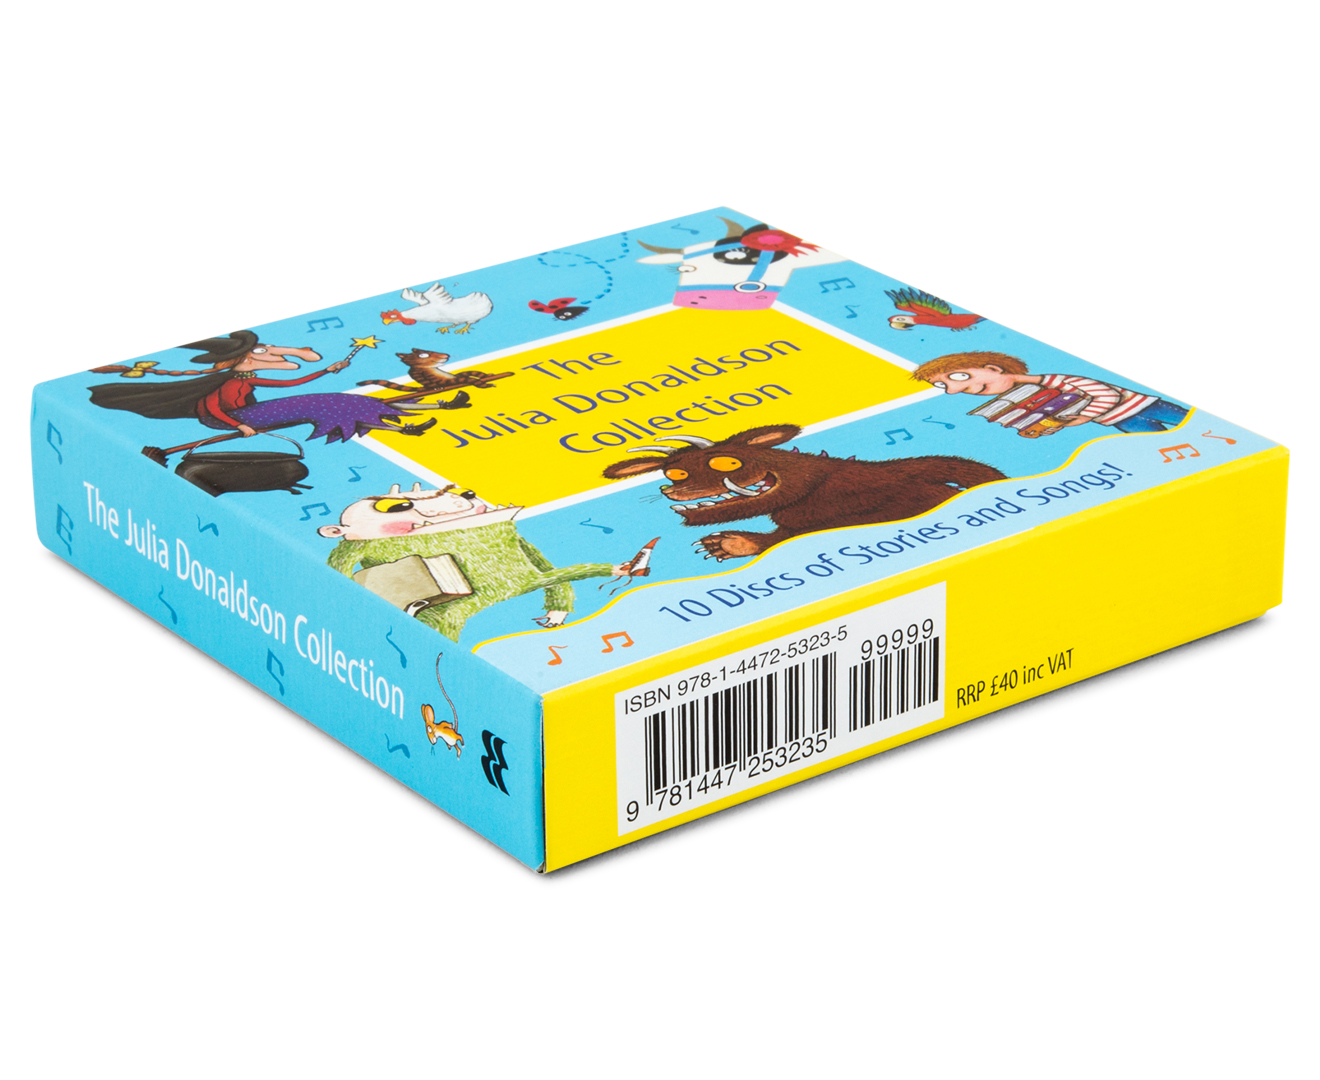 The Julia Donaldson Story Collection